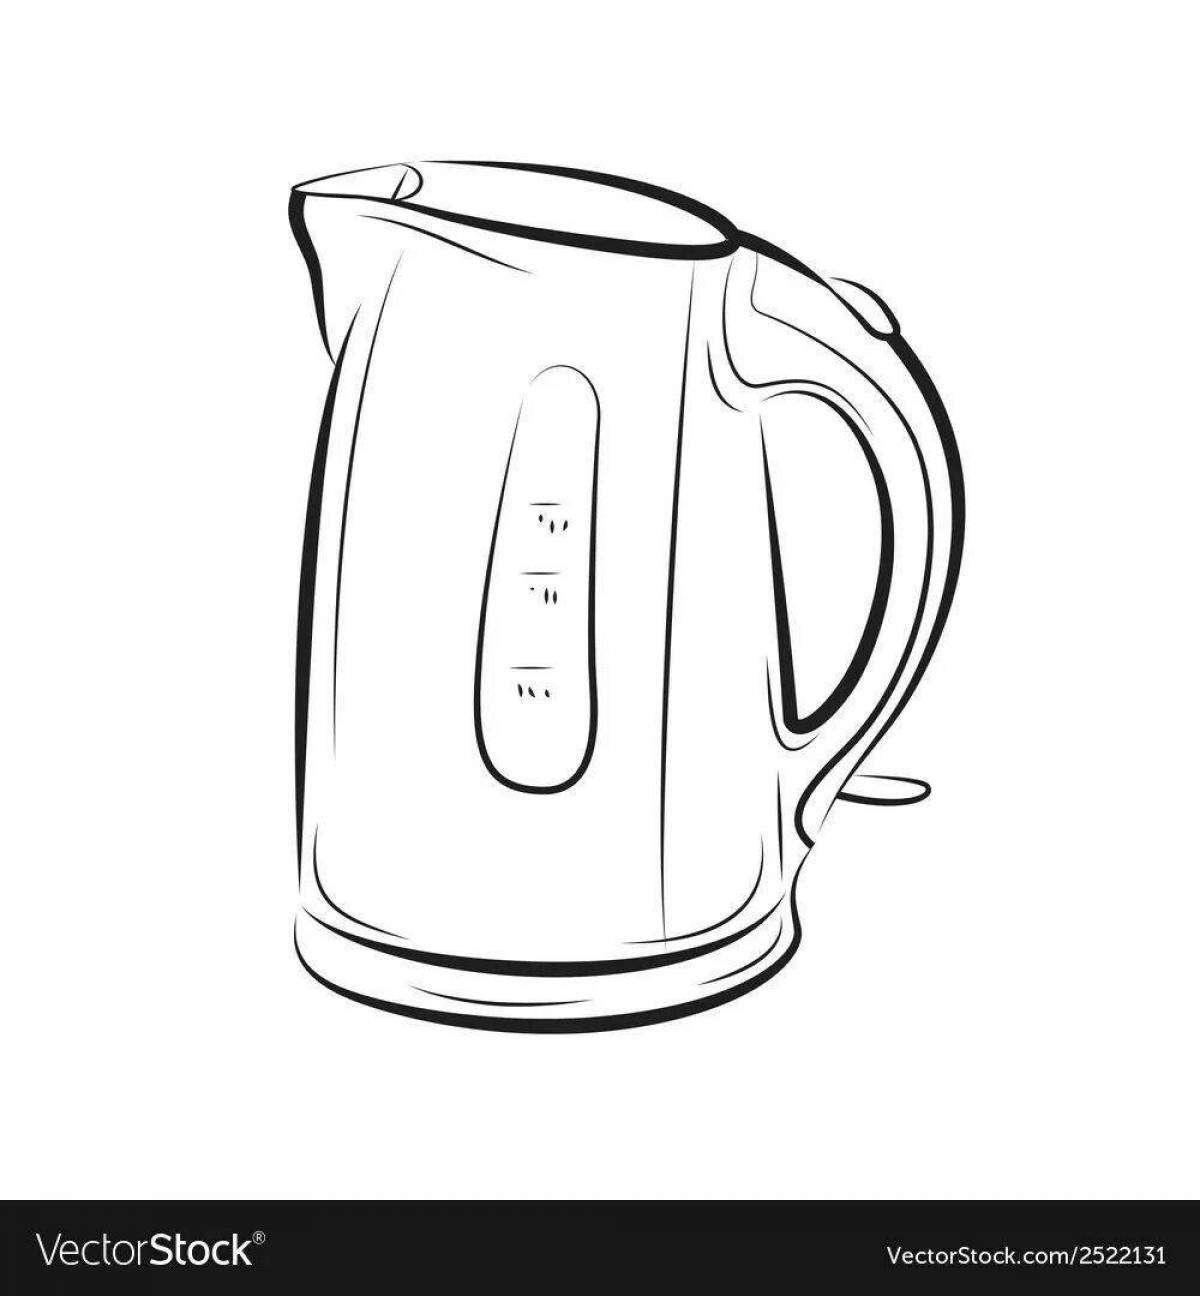 Attractive electric kettle coloring book for kids